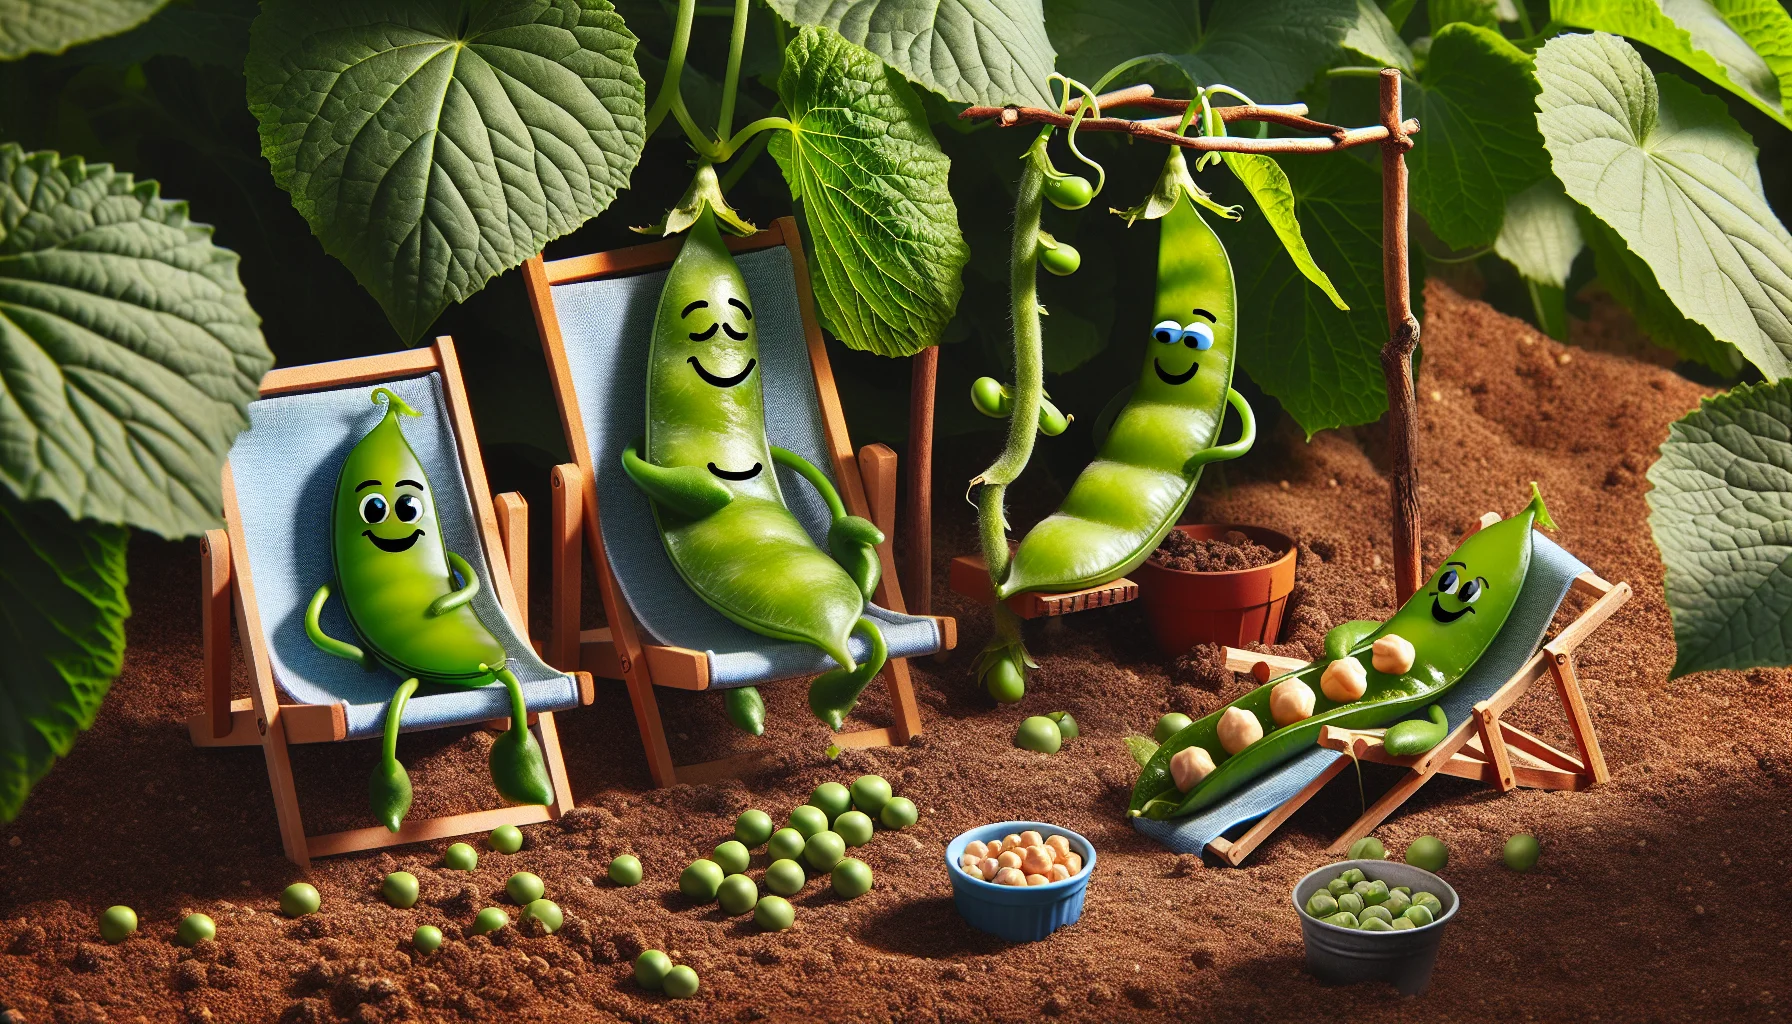 Create an enticing image of a humorous gardening scenario: there are three types of peas - green peas, snow peas, and chickpeas - being grown in a garden. Each pea appears personified with endearing facial expressions. The green peas are depicted relaxing on garden recliners, sunbathing under large leaves. The snow peas, in contrast, are joyously sliding down a cucumber vine like it's a slide. Last but not least, the chickpeas are seen busy constructing a small fort from twigs and leaves. This heartwarming scene radiates the joy and fun-filled experiences of gardening.